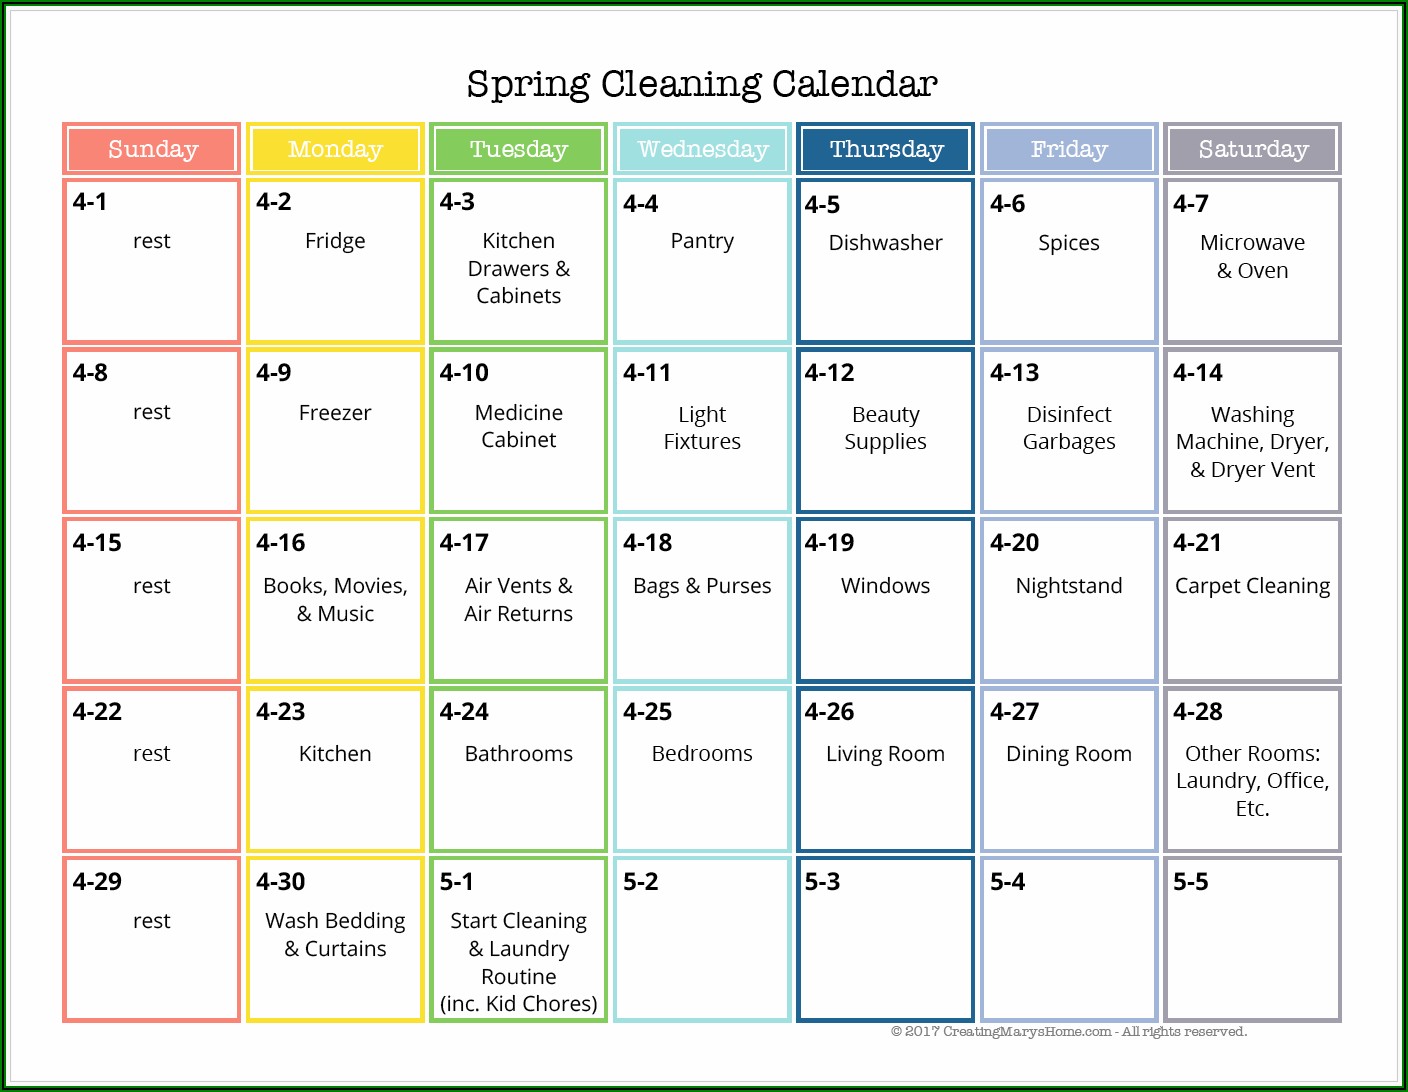 Care Home Cleaning Schedule Template